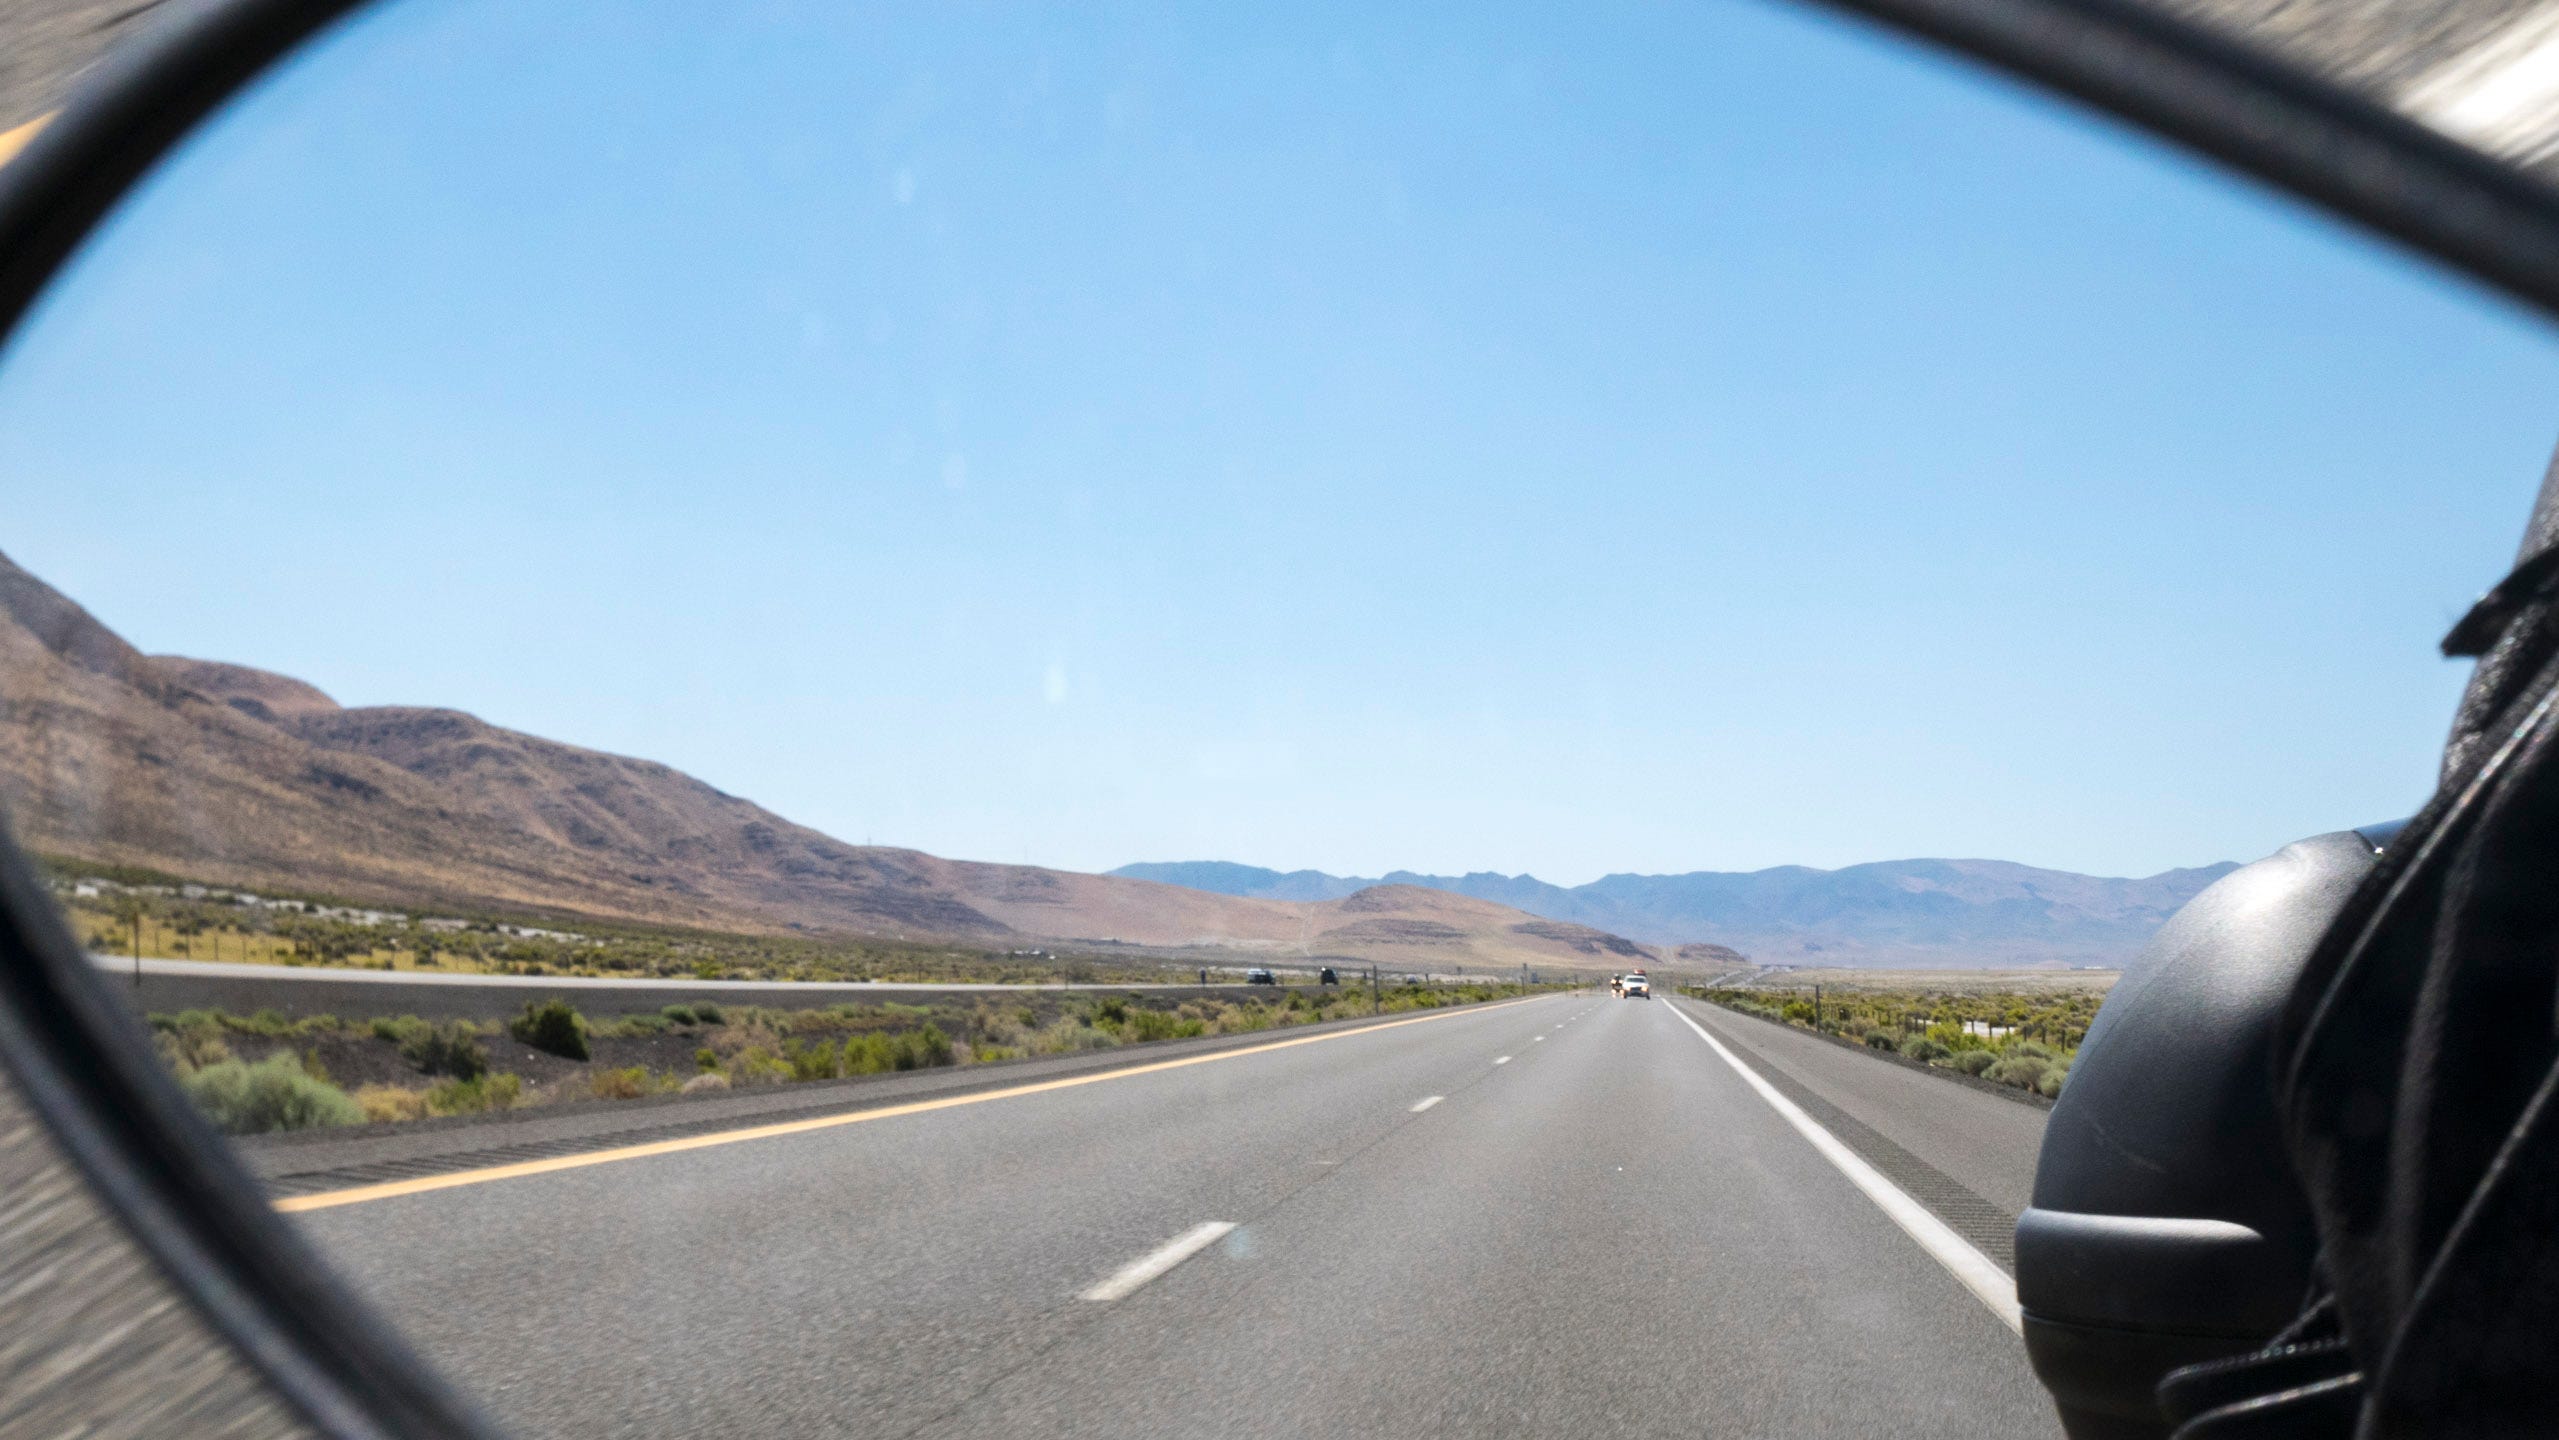 Photo of the rearview mirror of a motorcycle on a wide, modern, interstate highway in Nevada. The mirror occupies the majority of the picture frame, with just the curved edges of the mirror in the corners of the photo. In the mirror's reflection, the highway recedes arrow straight towards distant, hazy mountains. The headlights of two distant cars can also be seen. To the left, the highway median is peppered with green vegetation, and the two opposing lanes of the highway can also be seen. Beyond the opposing lanes, the land is flat with sparse, low vegetation before reaching more rugged, naked mountains.